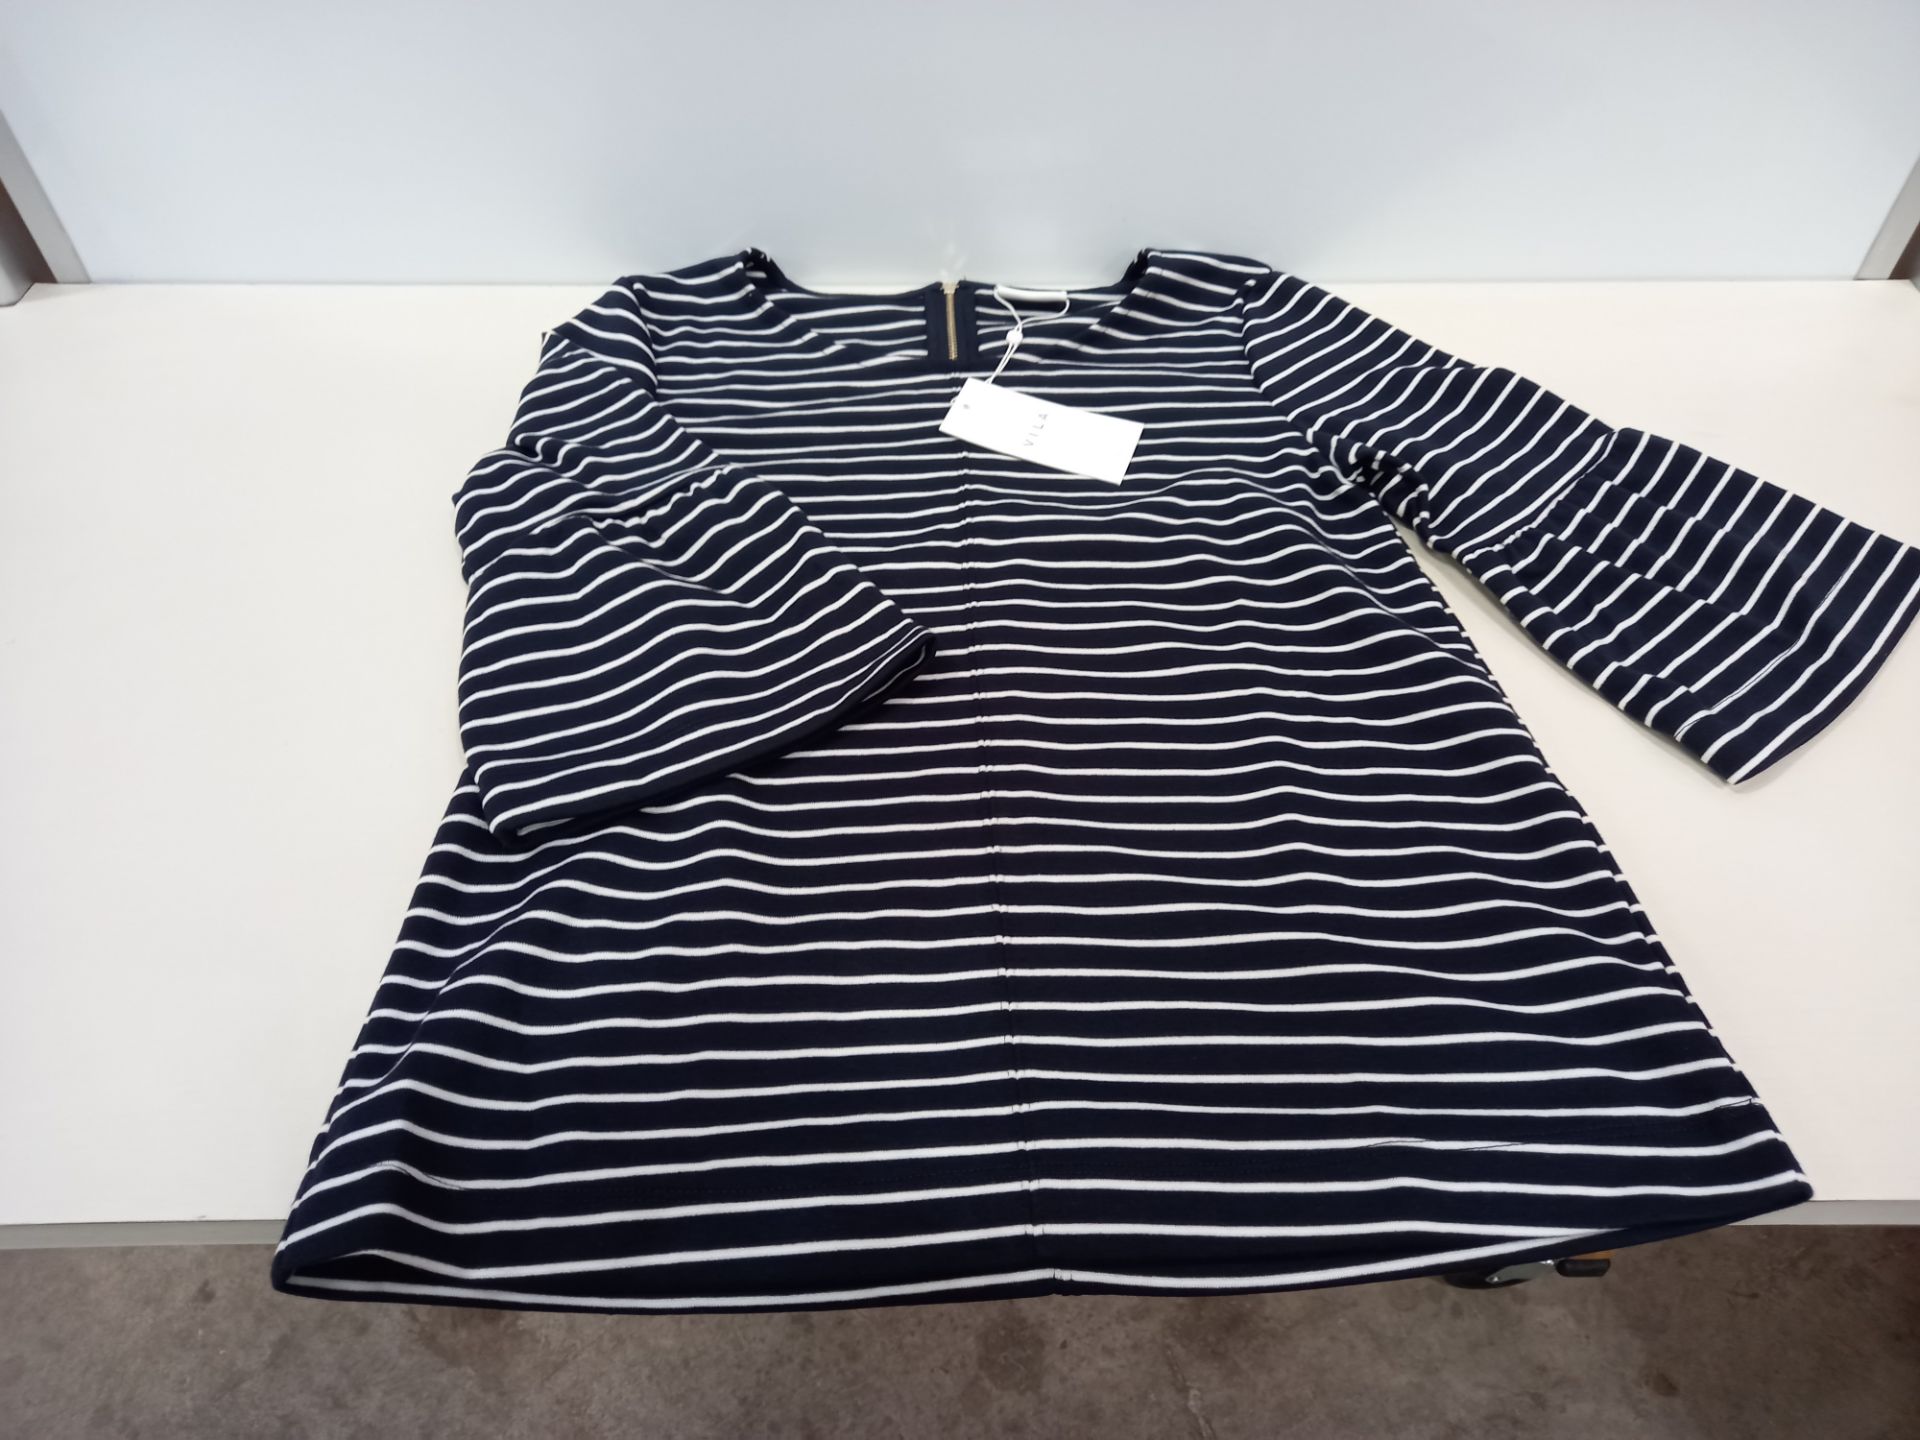 23 X BRAND NEW VILLA NAVY STRIPED TOPS IN VARIOUS SIZES